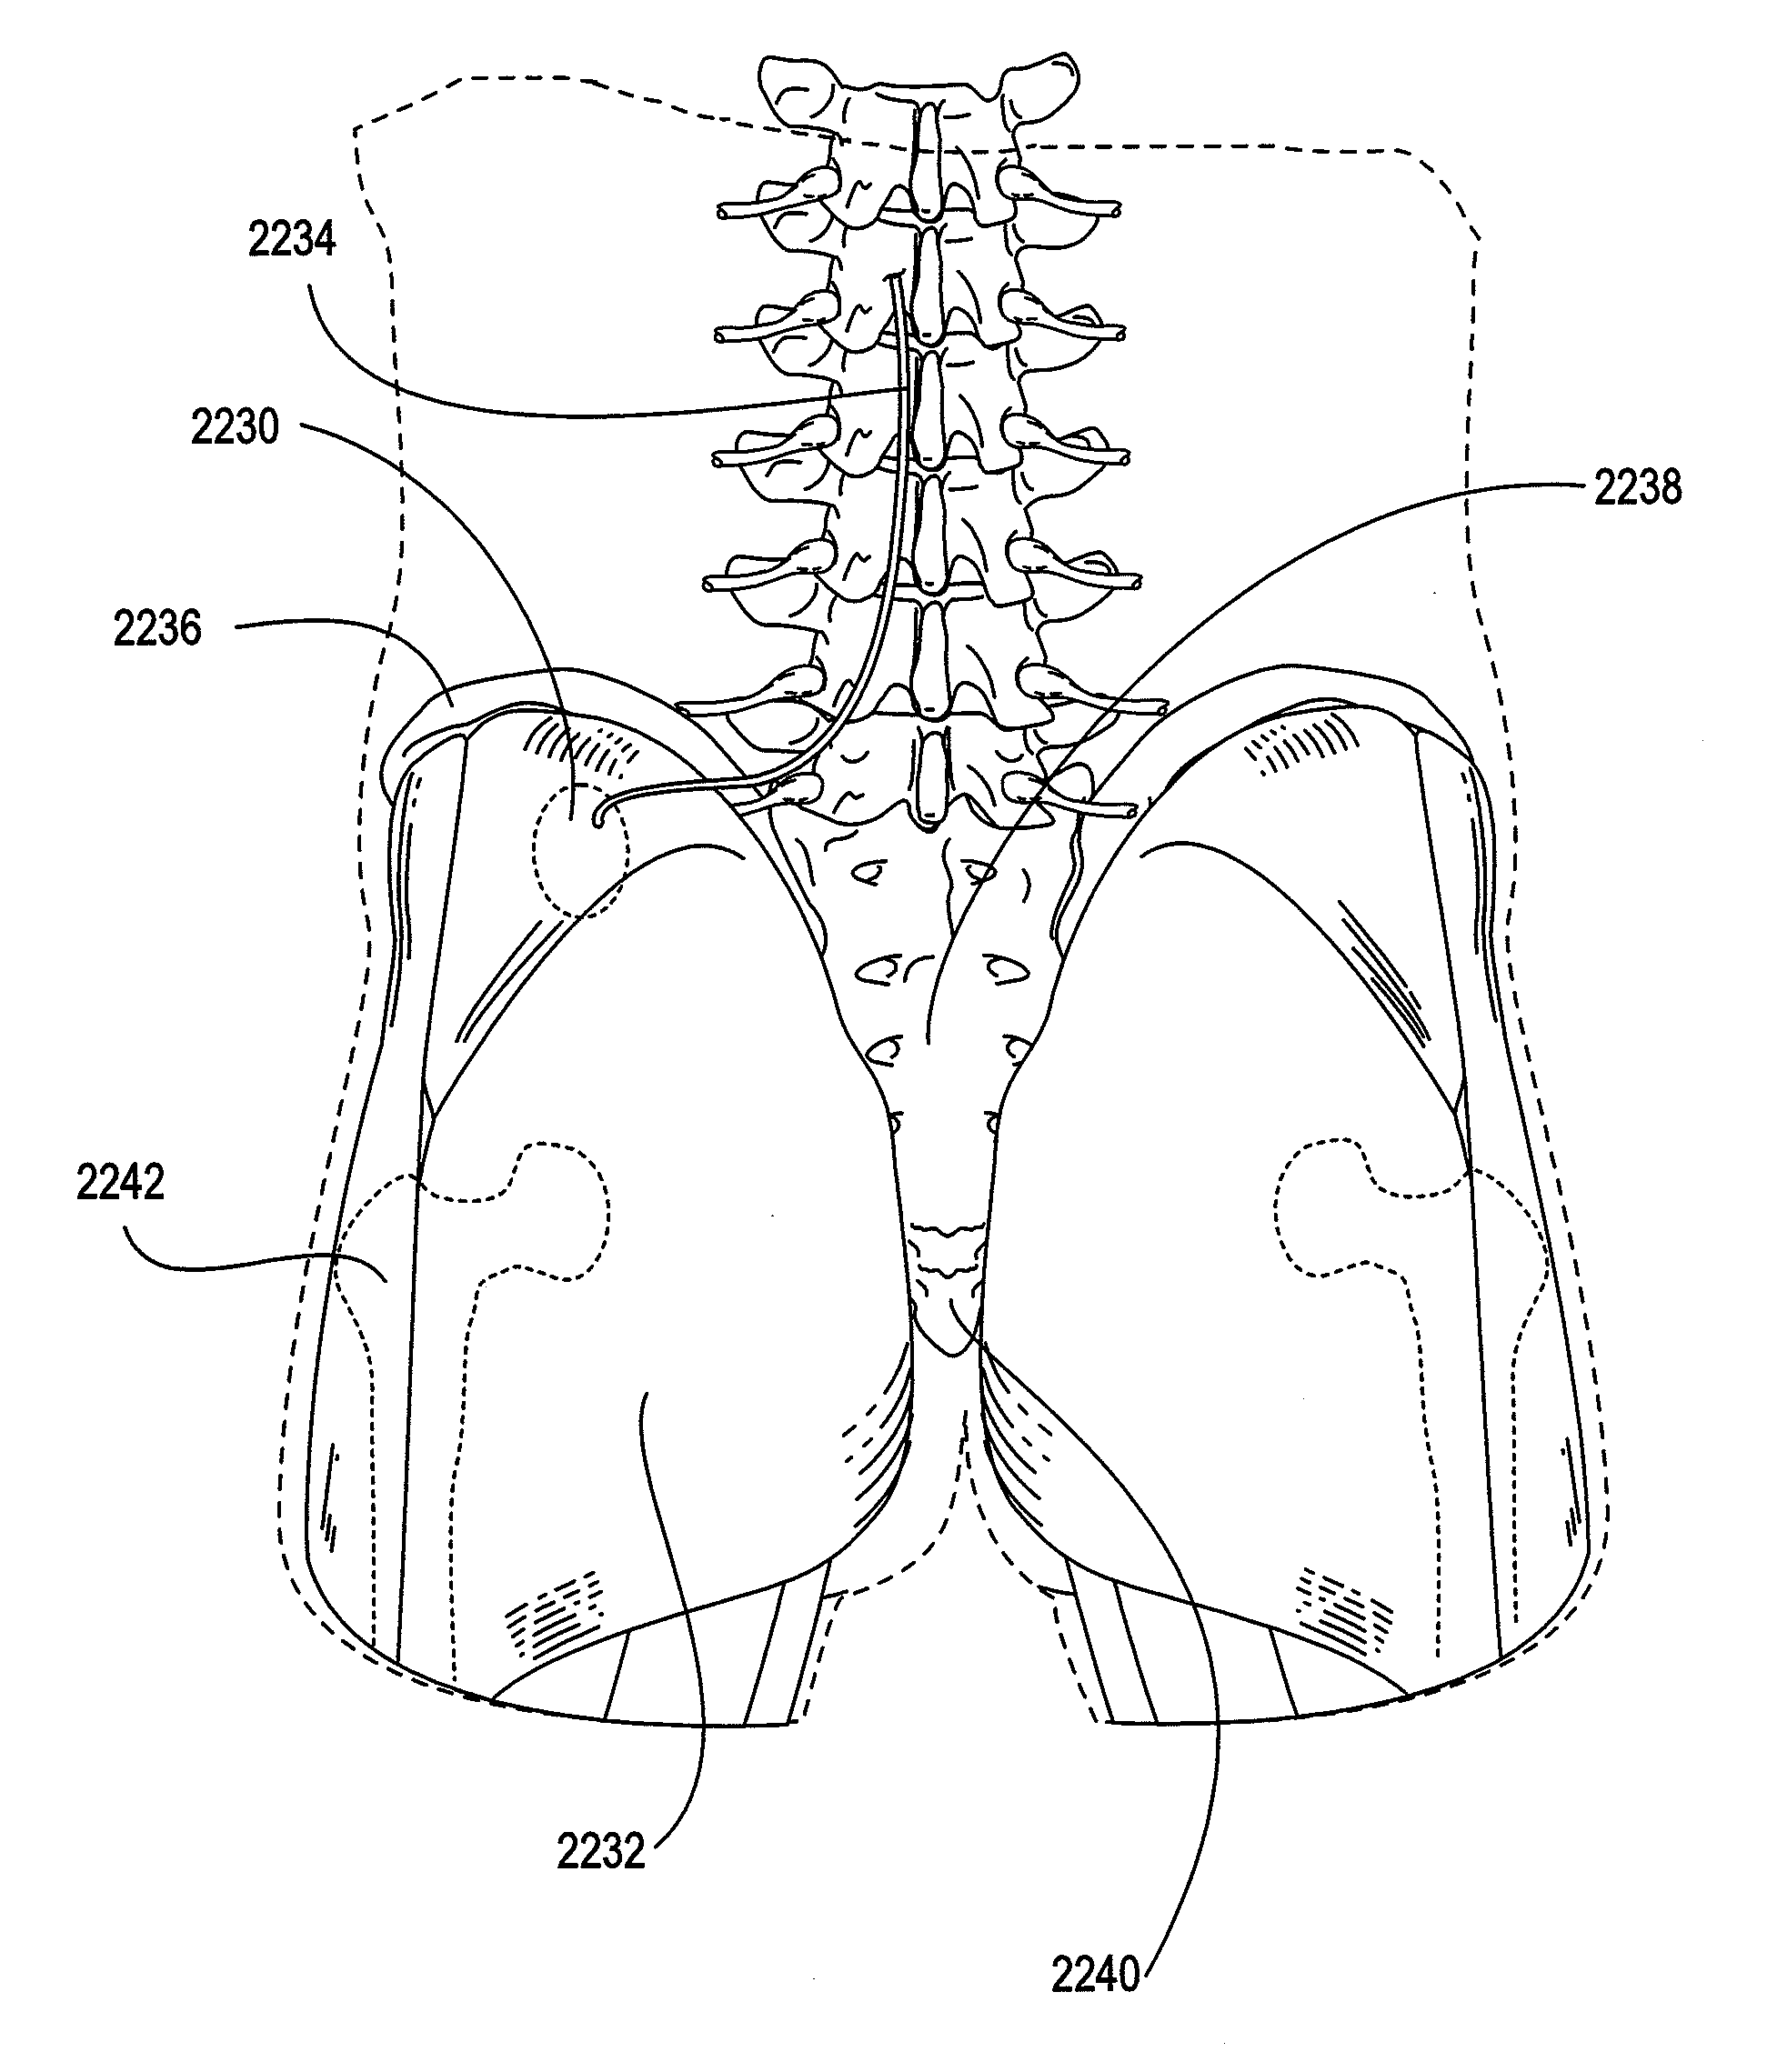 Devices, methods, and systems for harvesting energy in the body